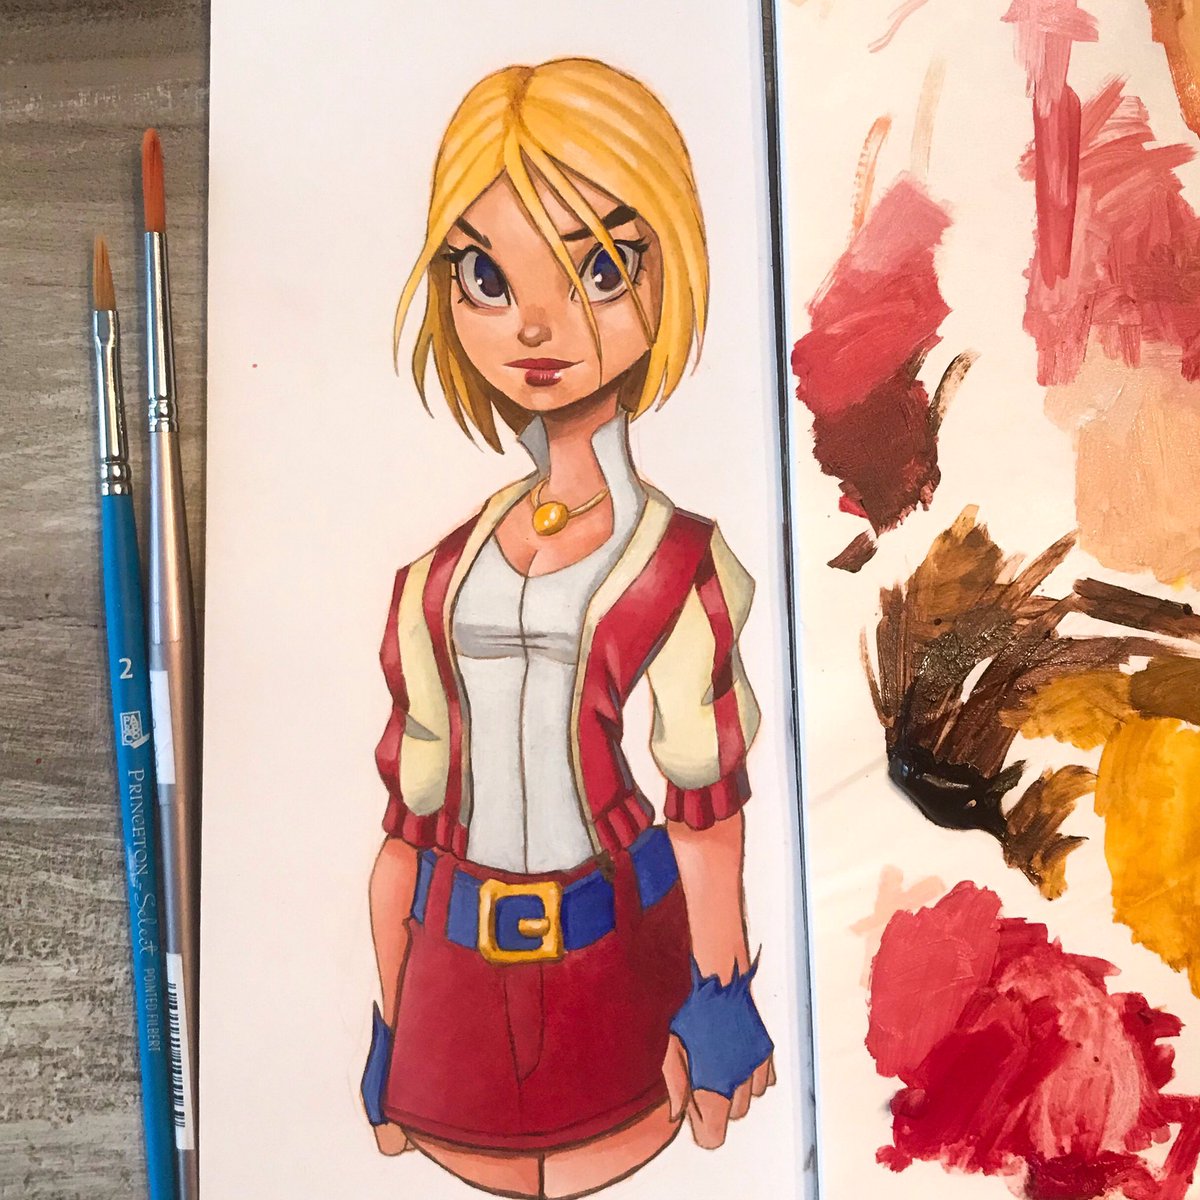 Experimenting with oil paint 🎨 for a commission of Power Girl “in Street clothes”. 🖌 
#powergirl #oilpaint #watersolubleoils #dccomics #sketch #doodle #art #painting #windsornewton #dc #traditionalart #disney #cartoon #anime #paint #artistsoninstagram